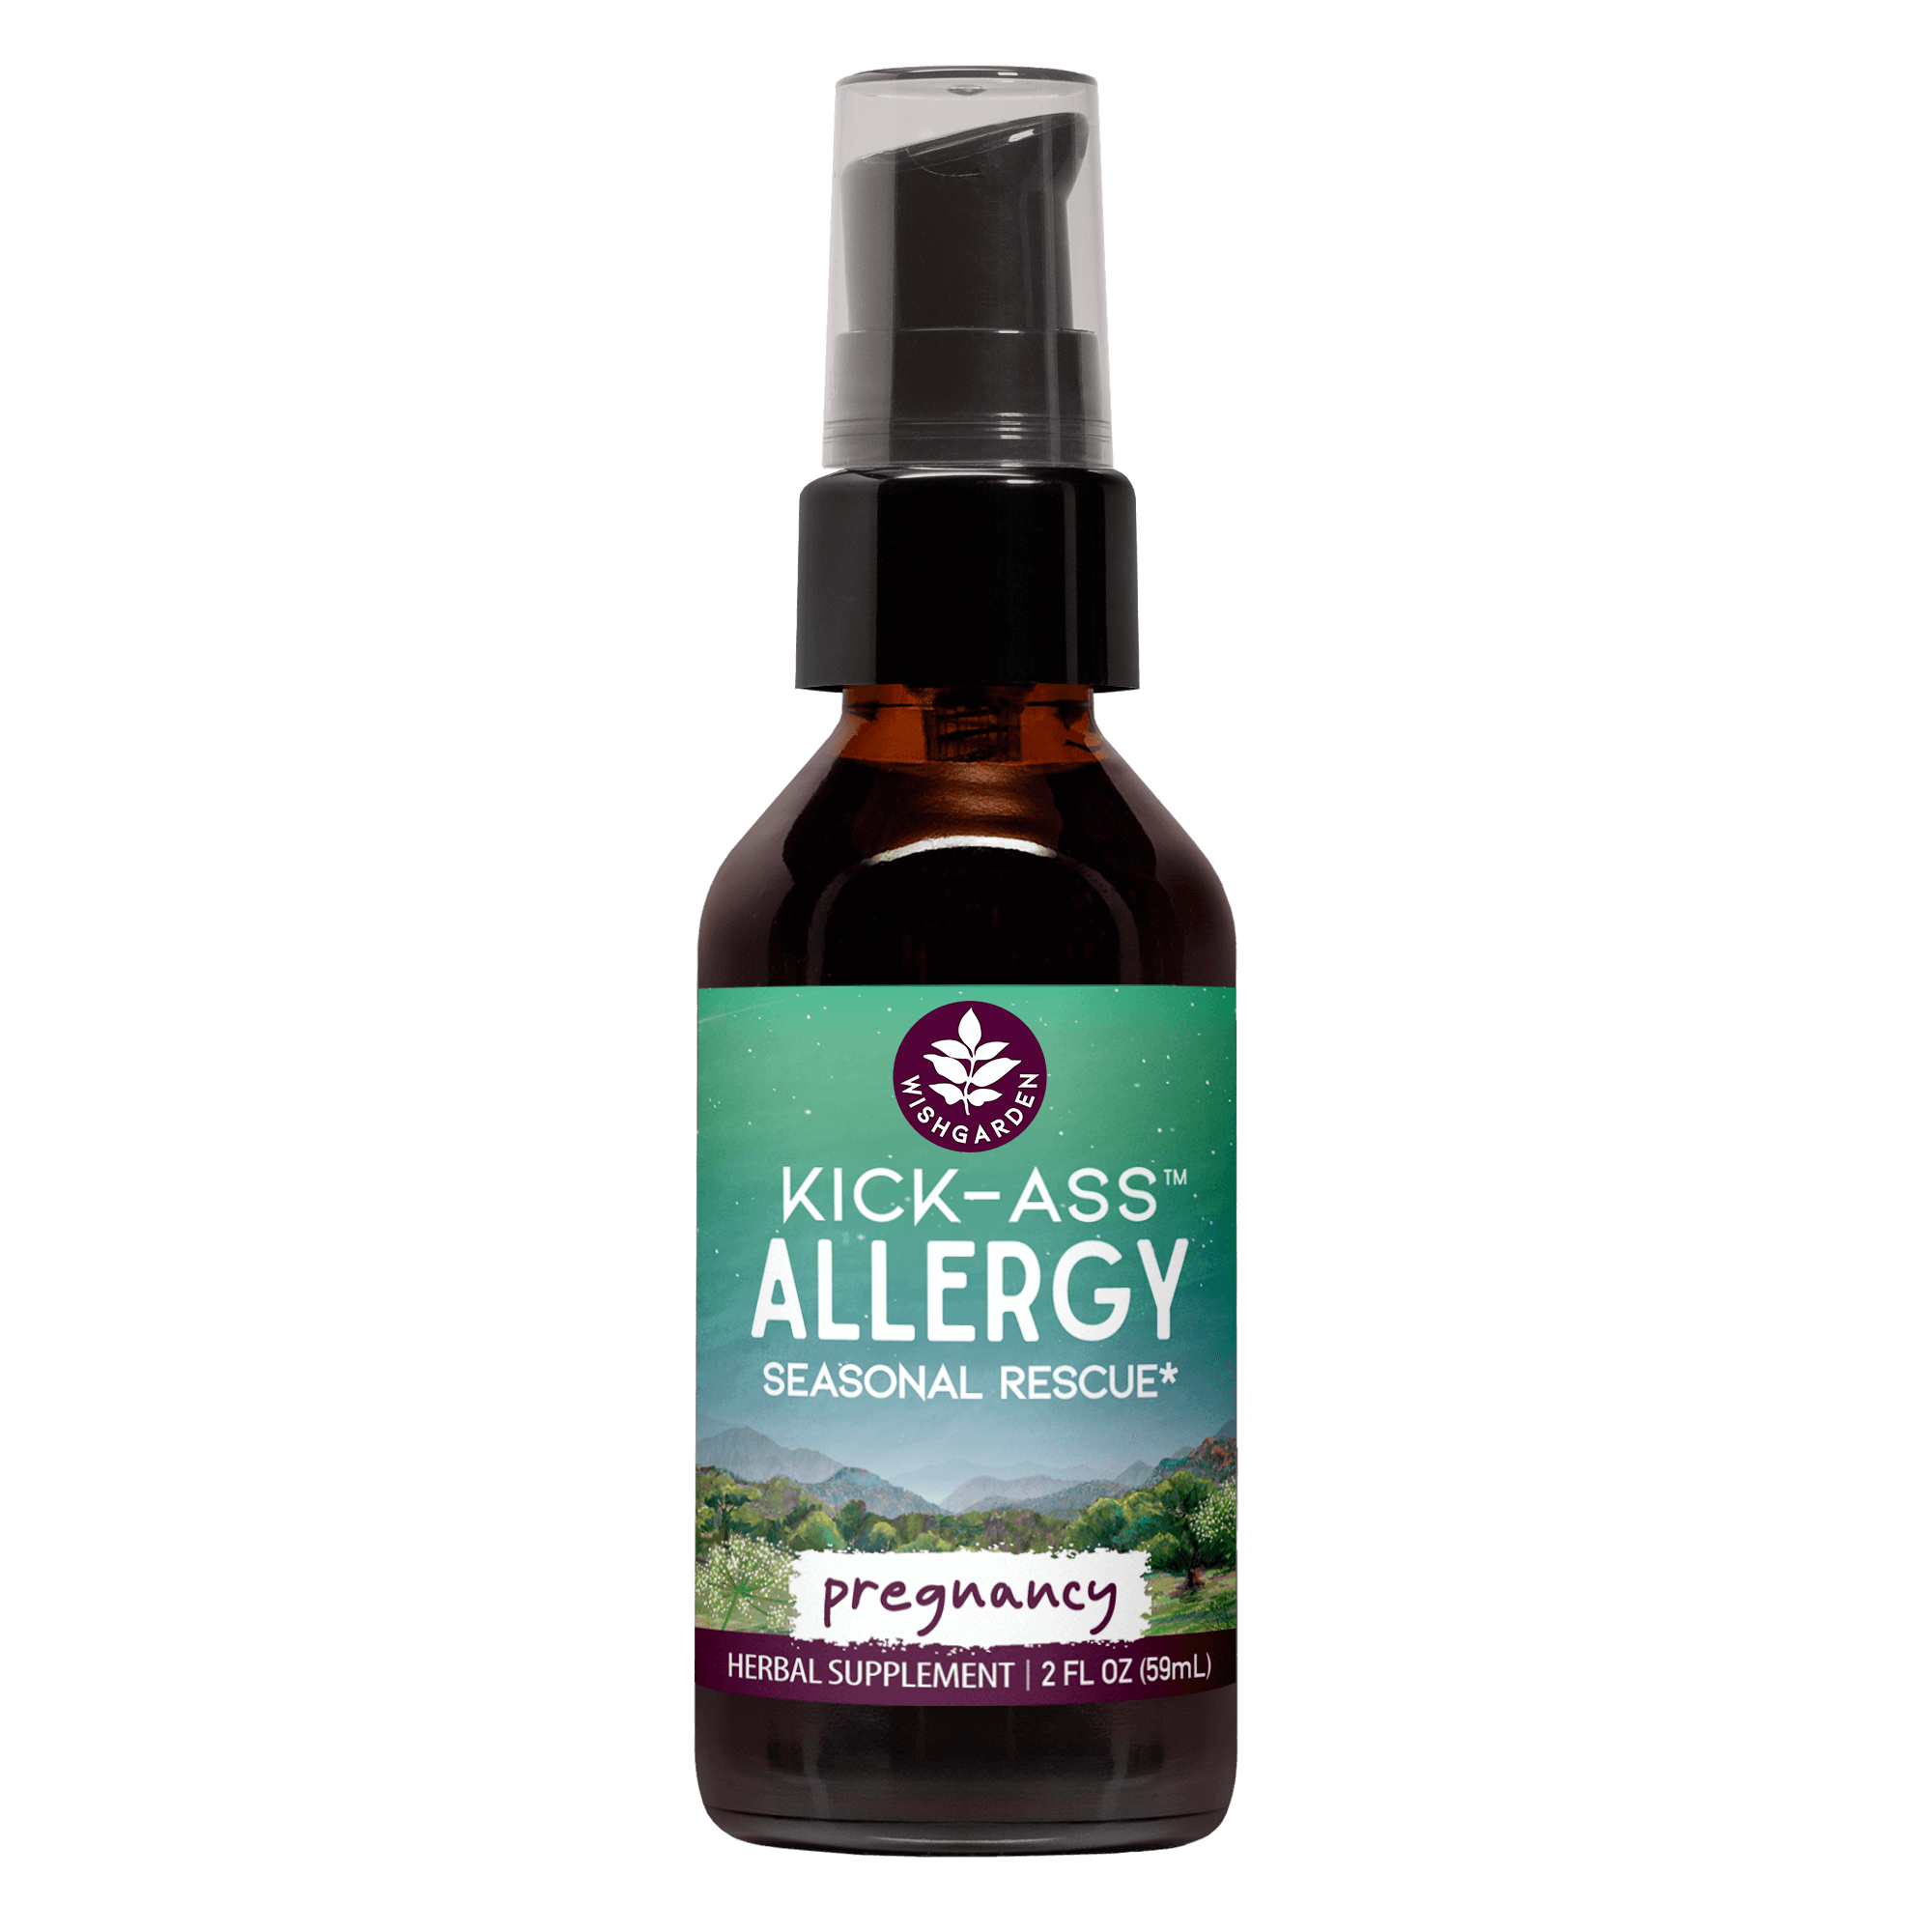 Image of Kick-Ass Allergy Seasonal Rescue For Pregnancy